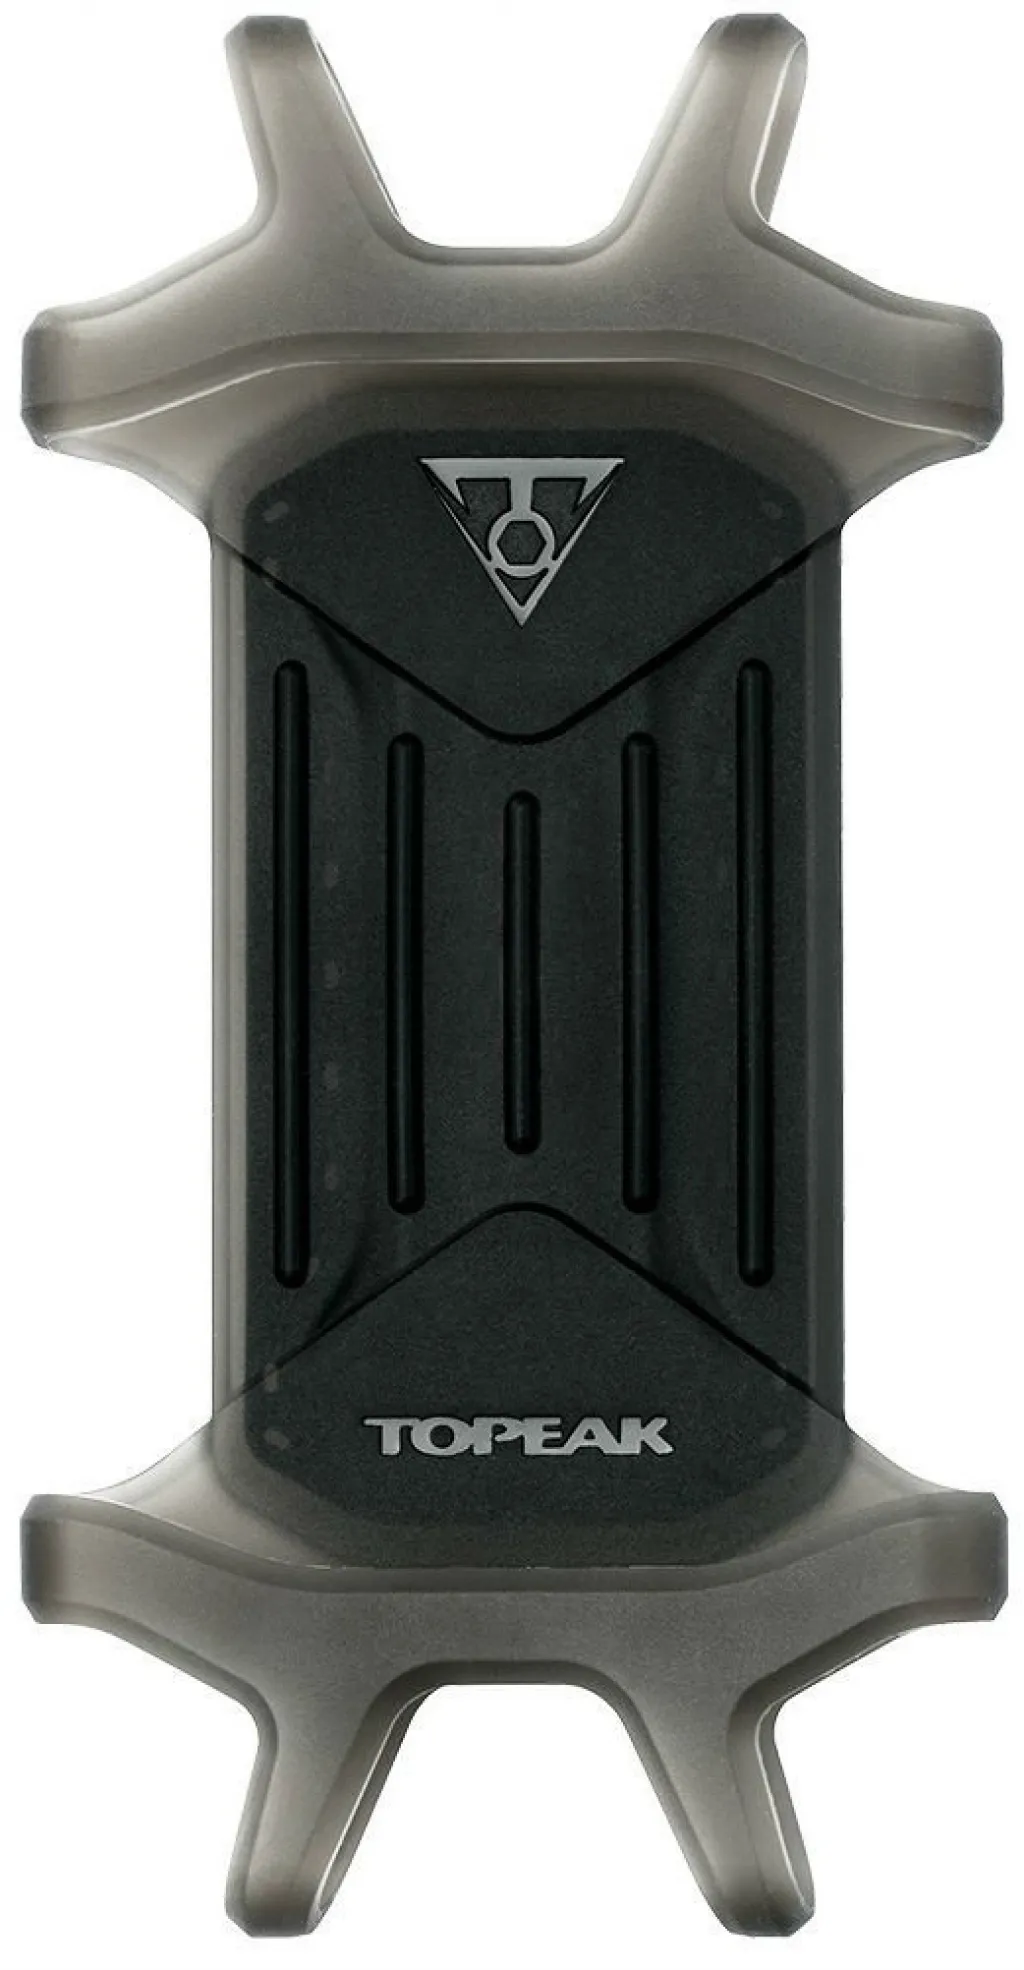 Тримач для телефона Topeak Omni RideCase (case only), fit smart phone from 4.5" to 6.5"